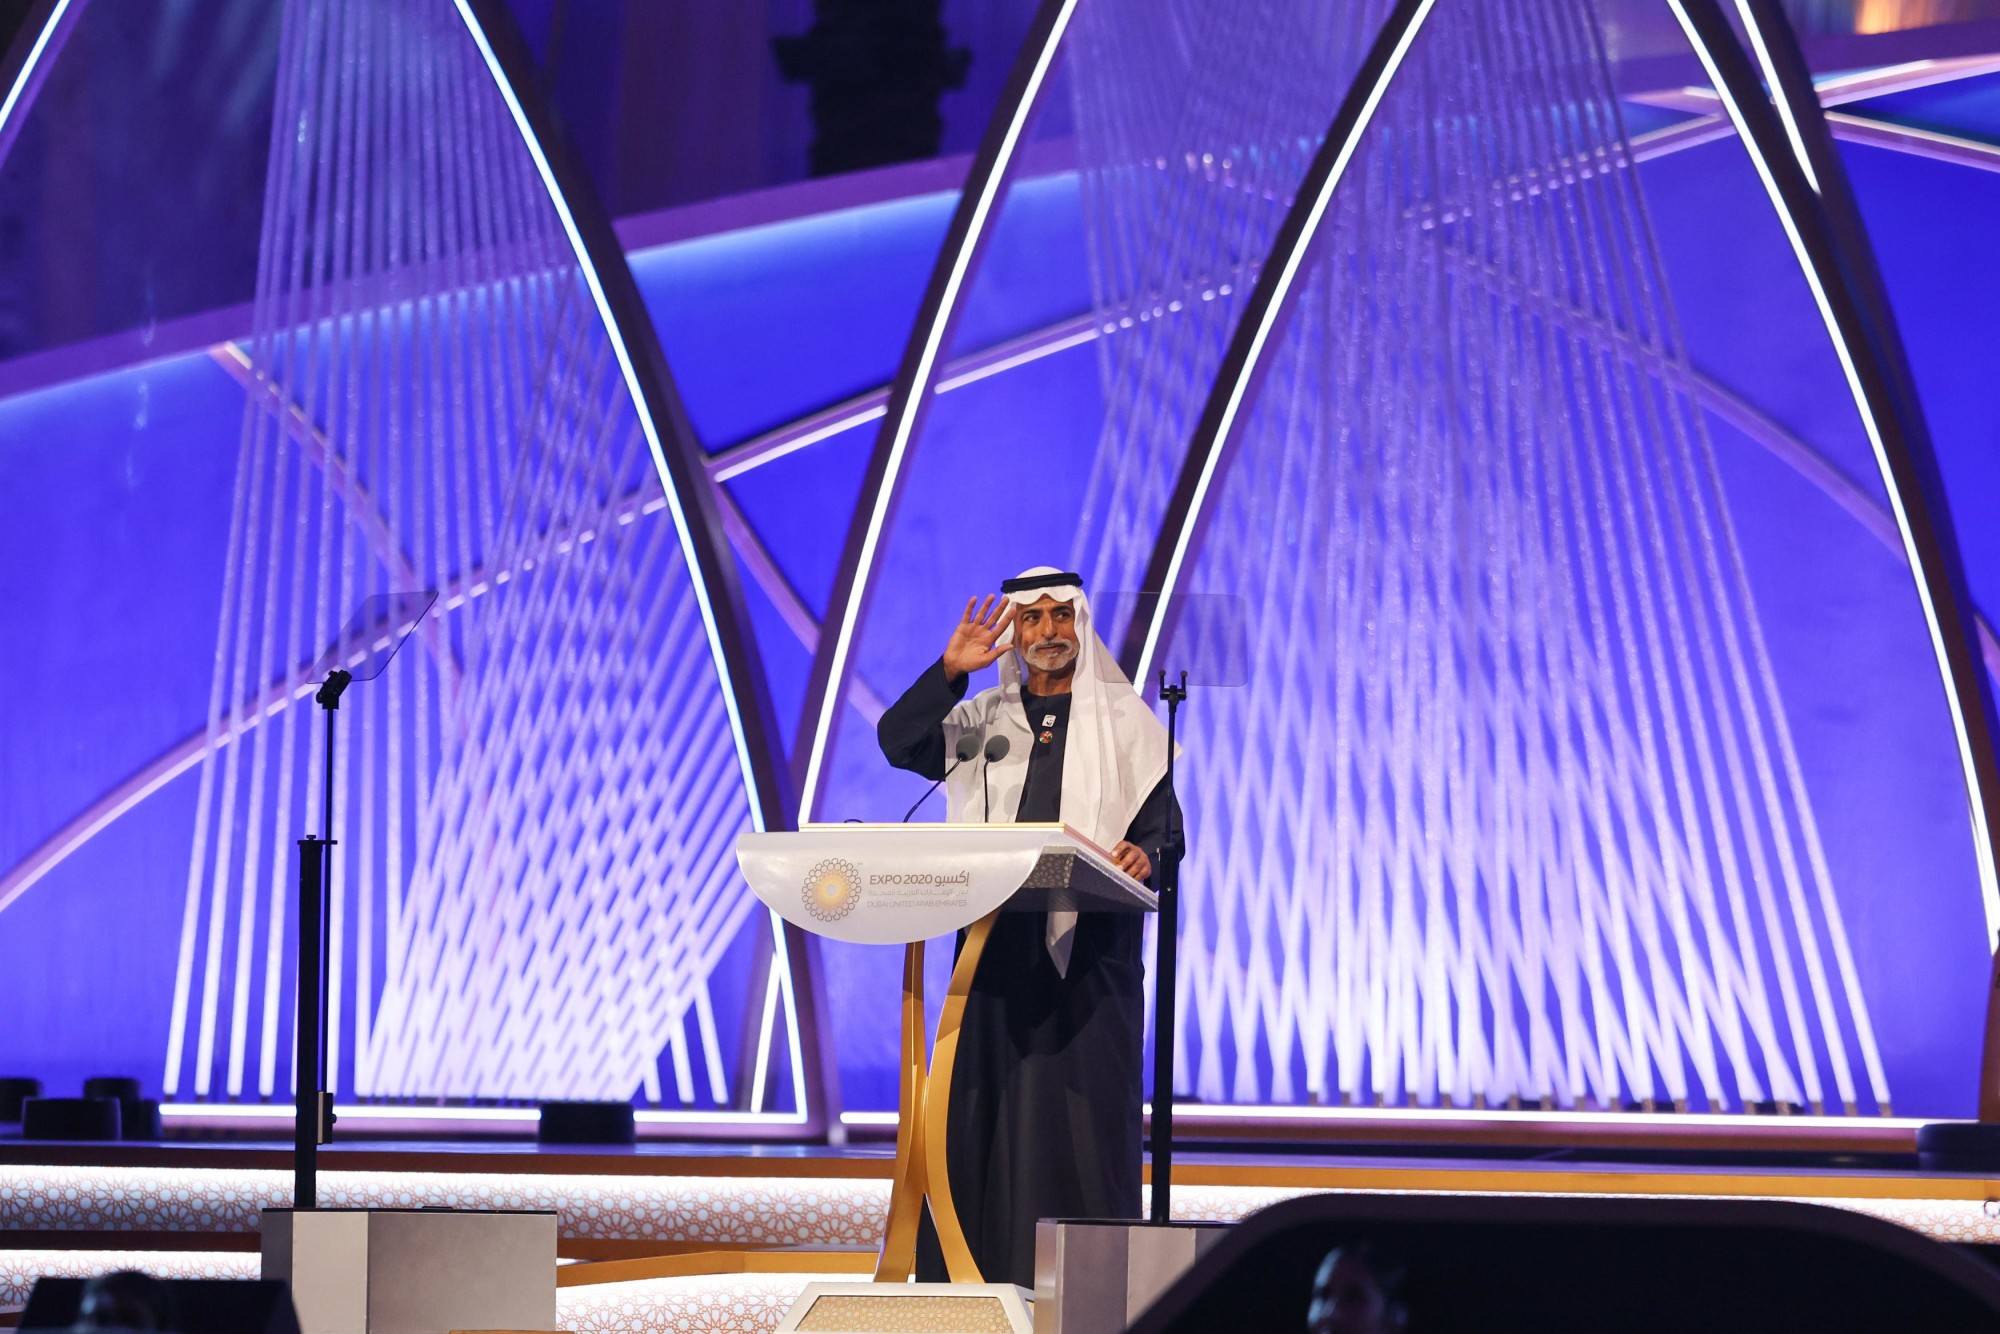 His Excellency Sheikh Nahayan Mabarak Al Nahayan, UAE Minister of Tolerance and Coexistence and Commissioner General of Expo 2020 Dubai, makes his closing speech during the Expo 2020 Dubai Closing Ceremony at Al Wasl m71486